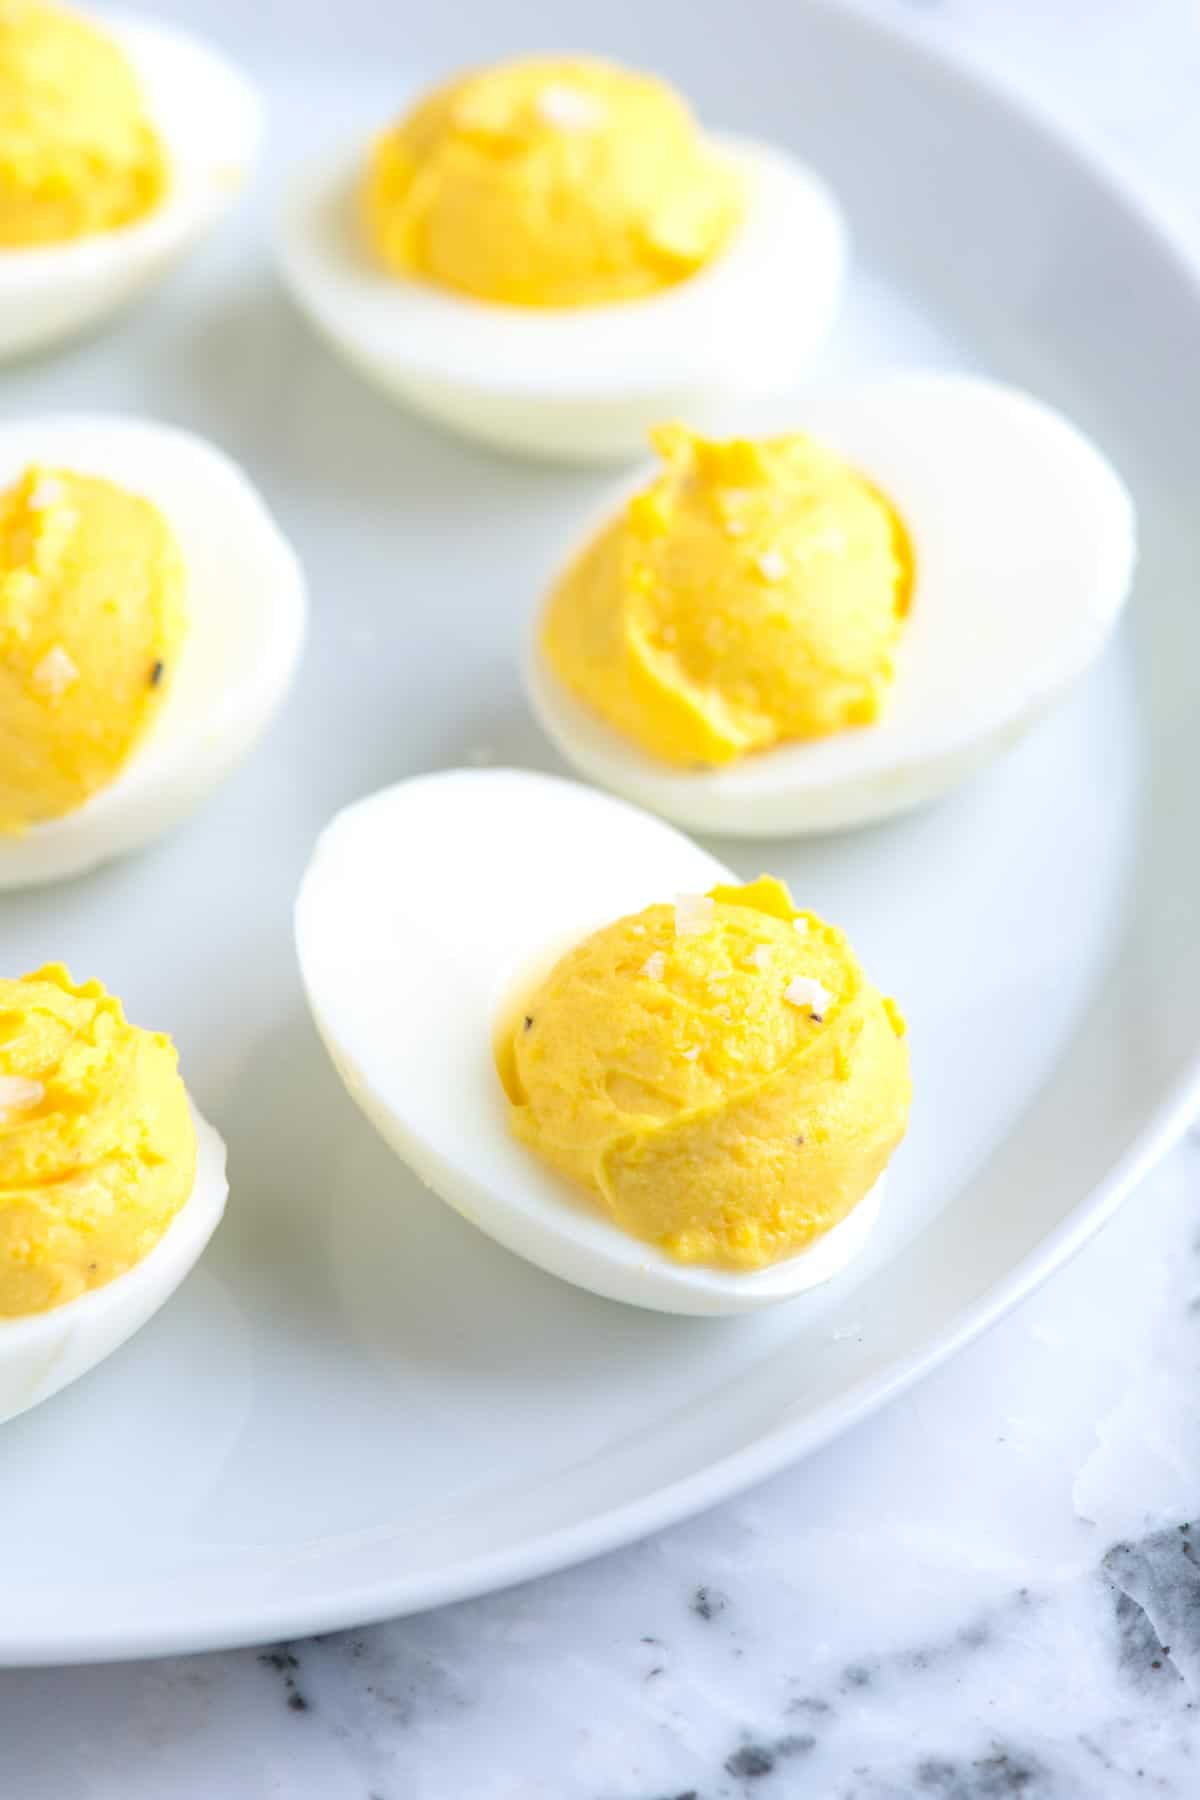 How to make the best deviled eggs with mayonnaise, vinegar, and mustard. Plus, suggestions for spicing them up and our best tips for hard boiling eggs.